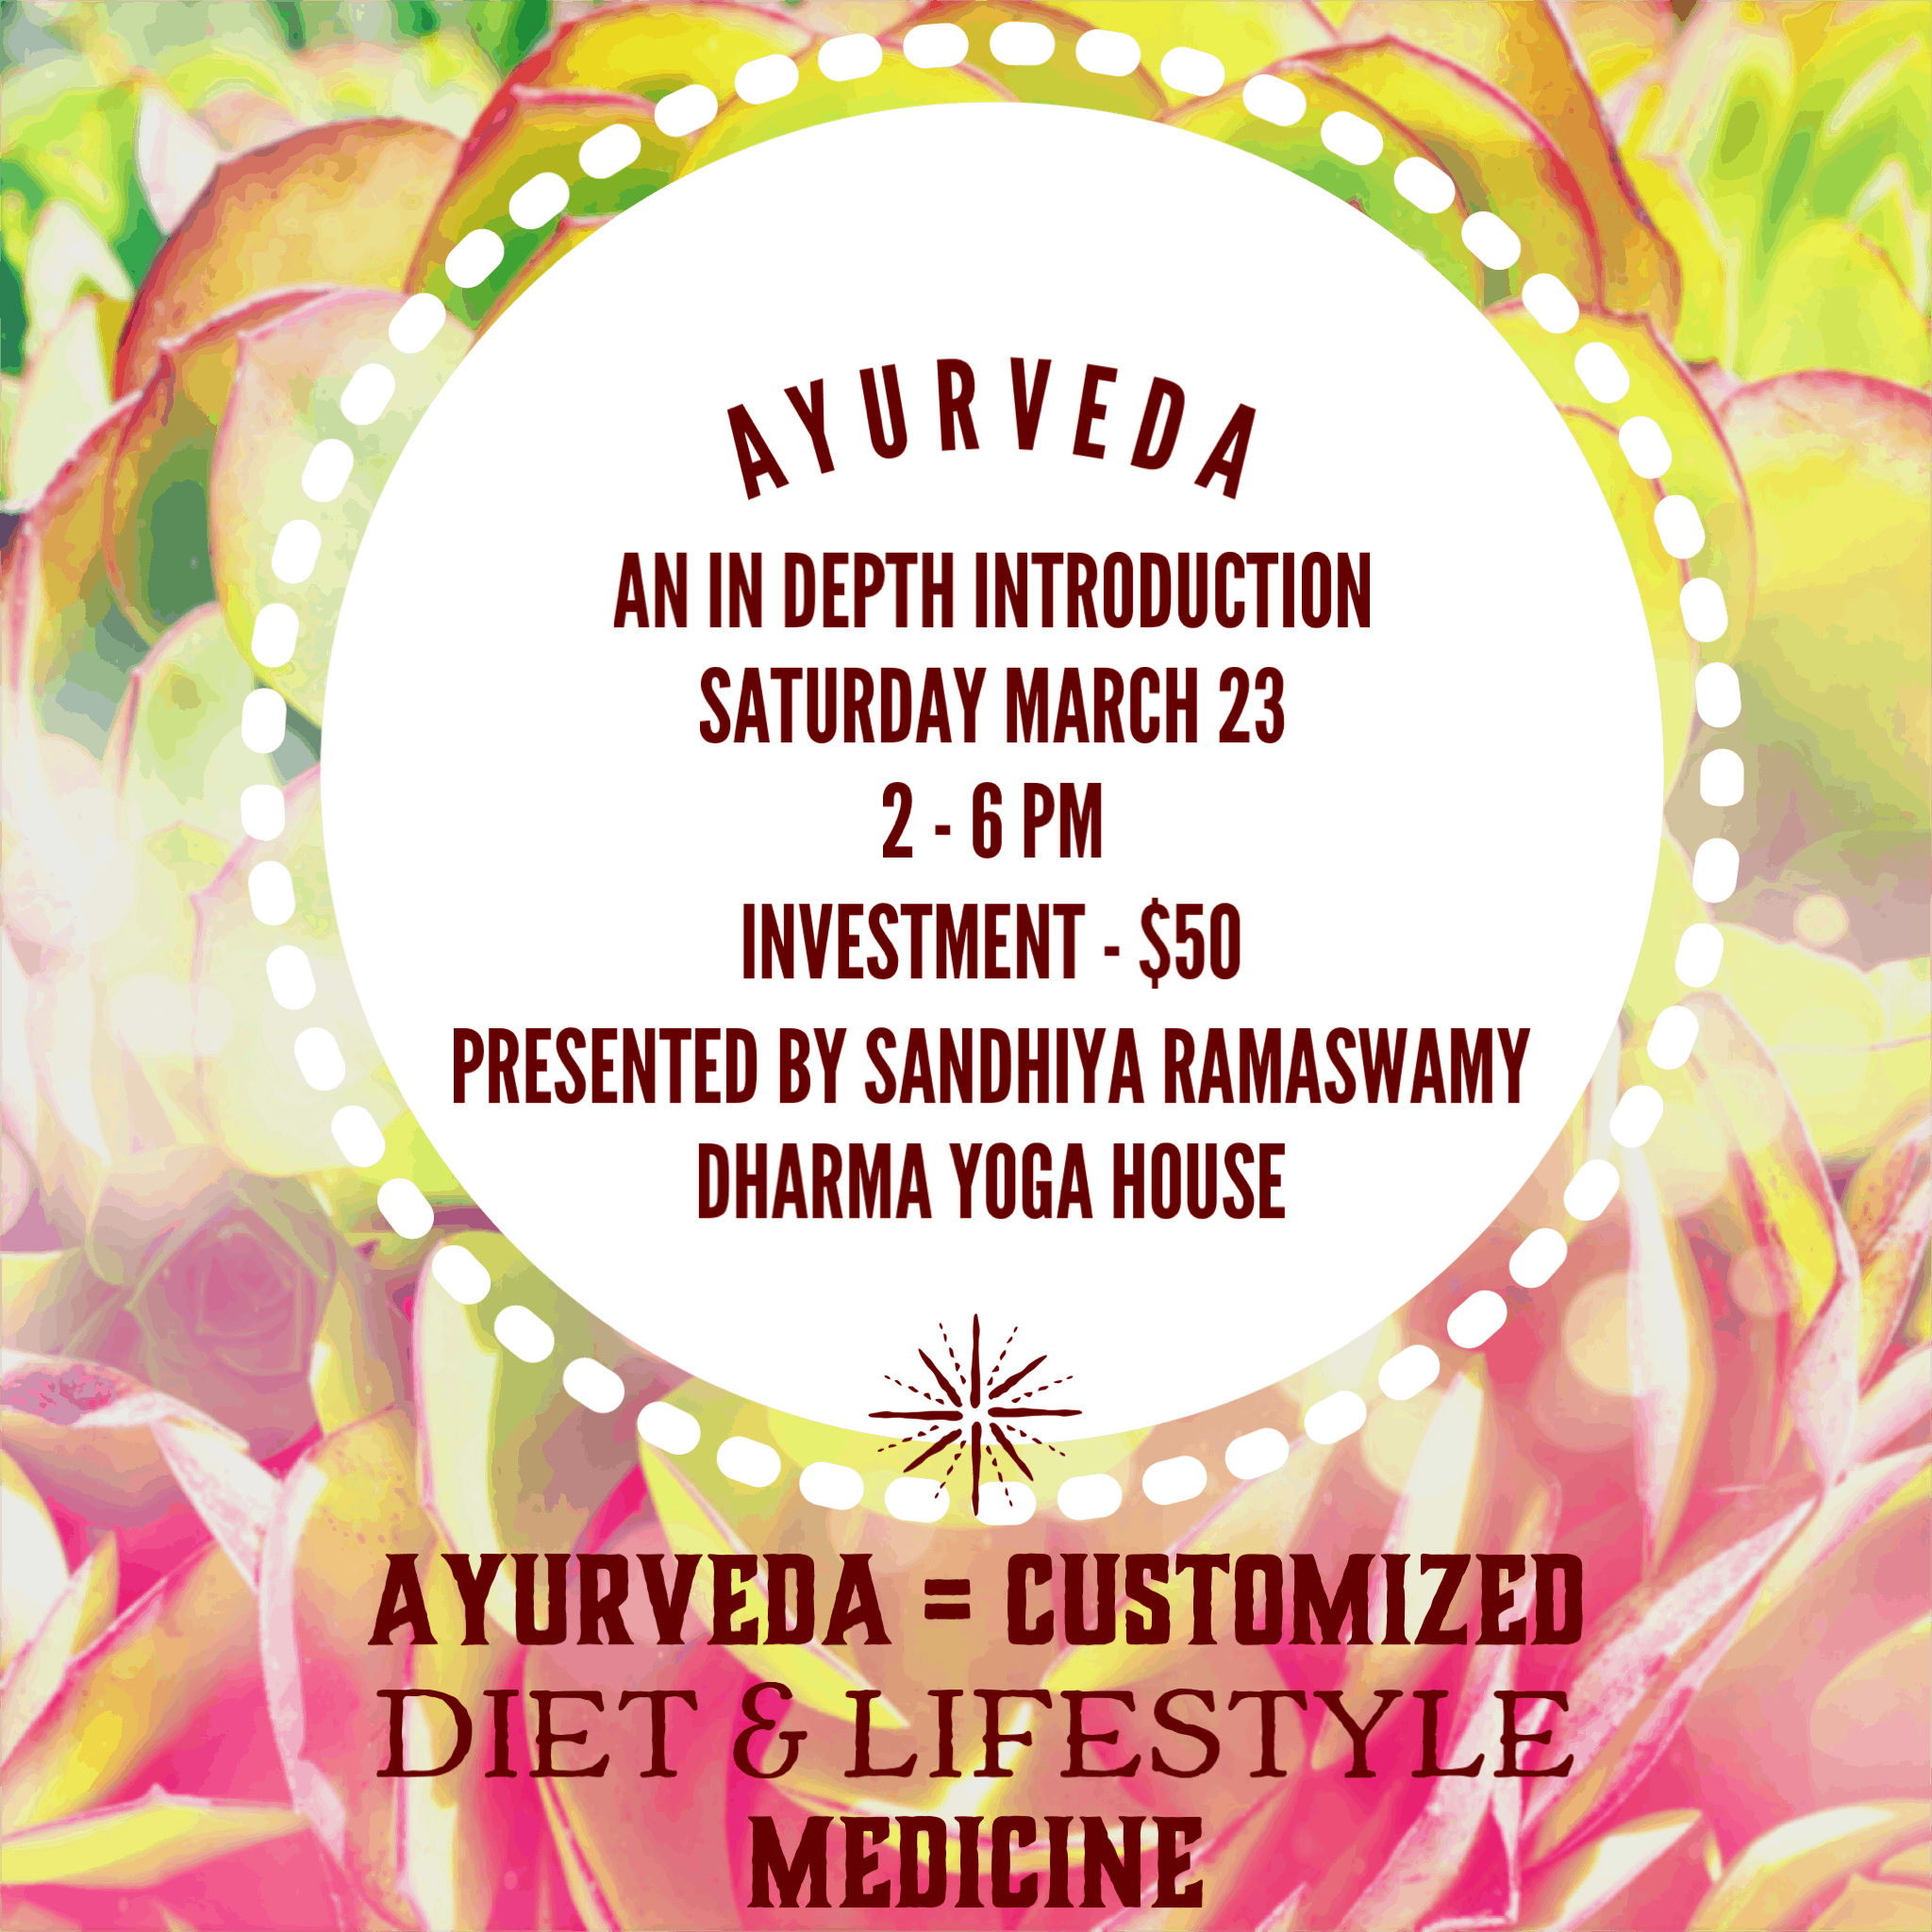 An Afternoon of Ayurveda – 2- 6pm Sat Mar 23 at Dharma Yoga House